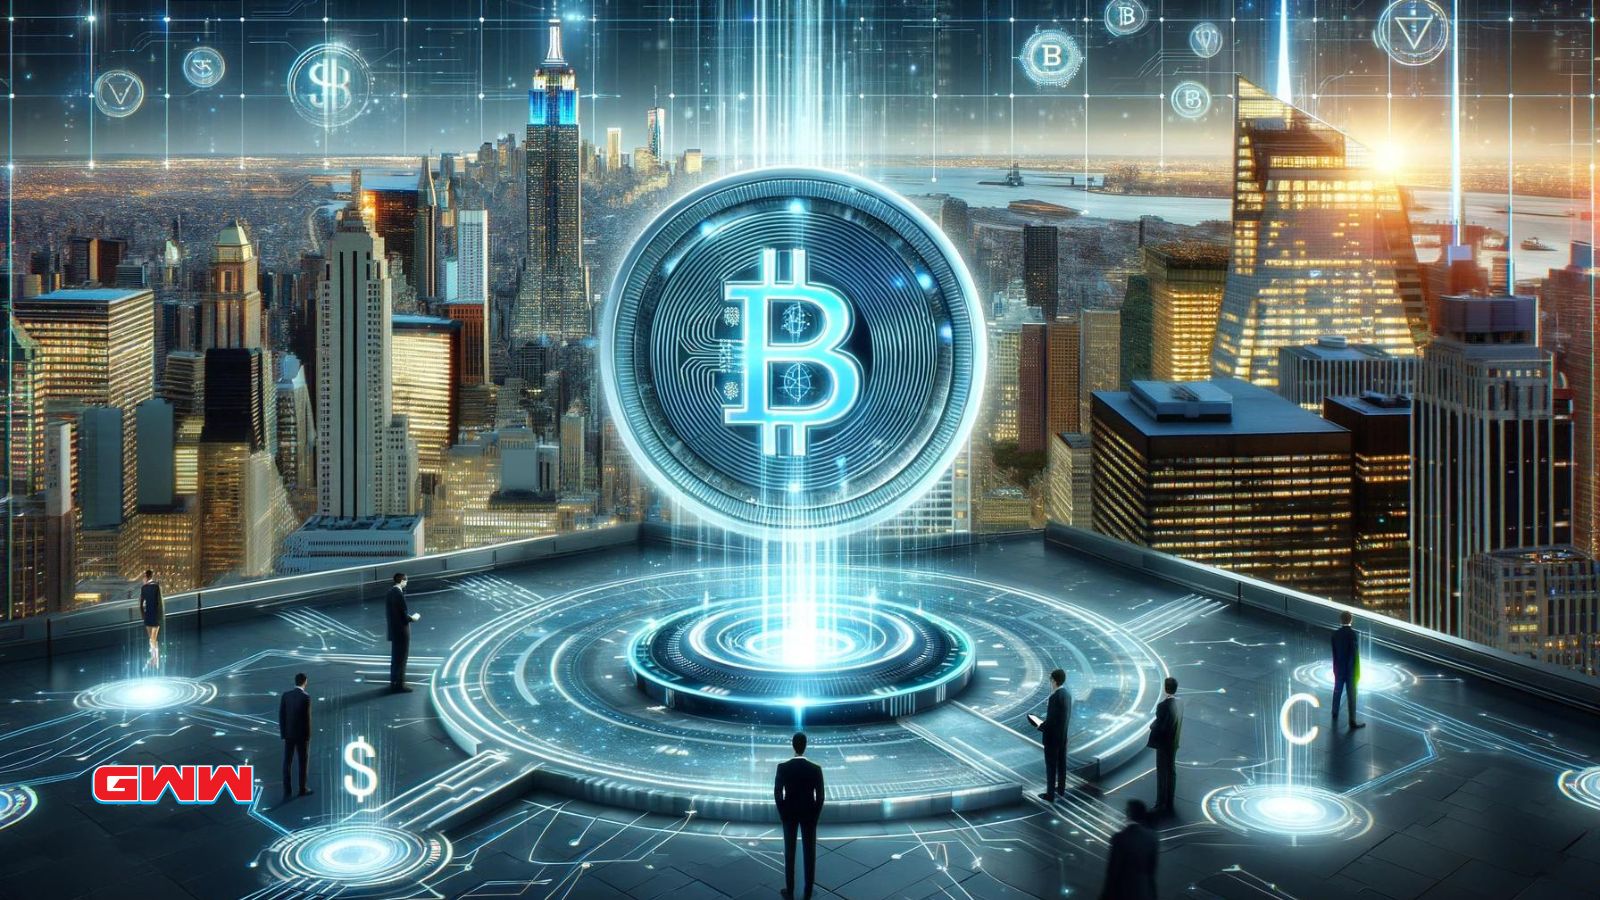 Bitcoin hologram over city, future of currency concept